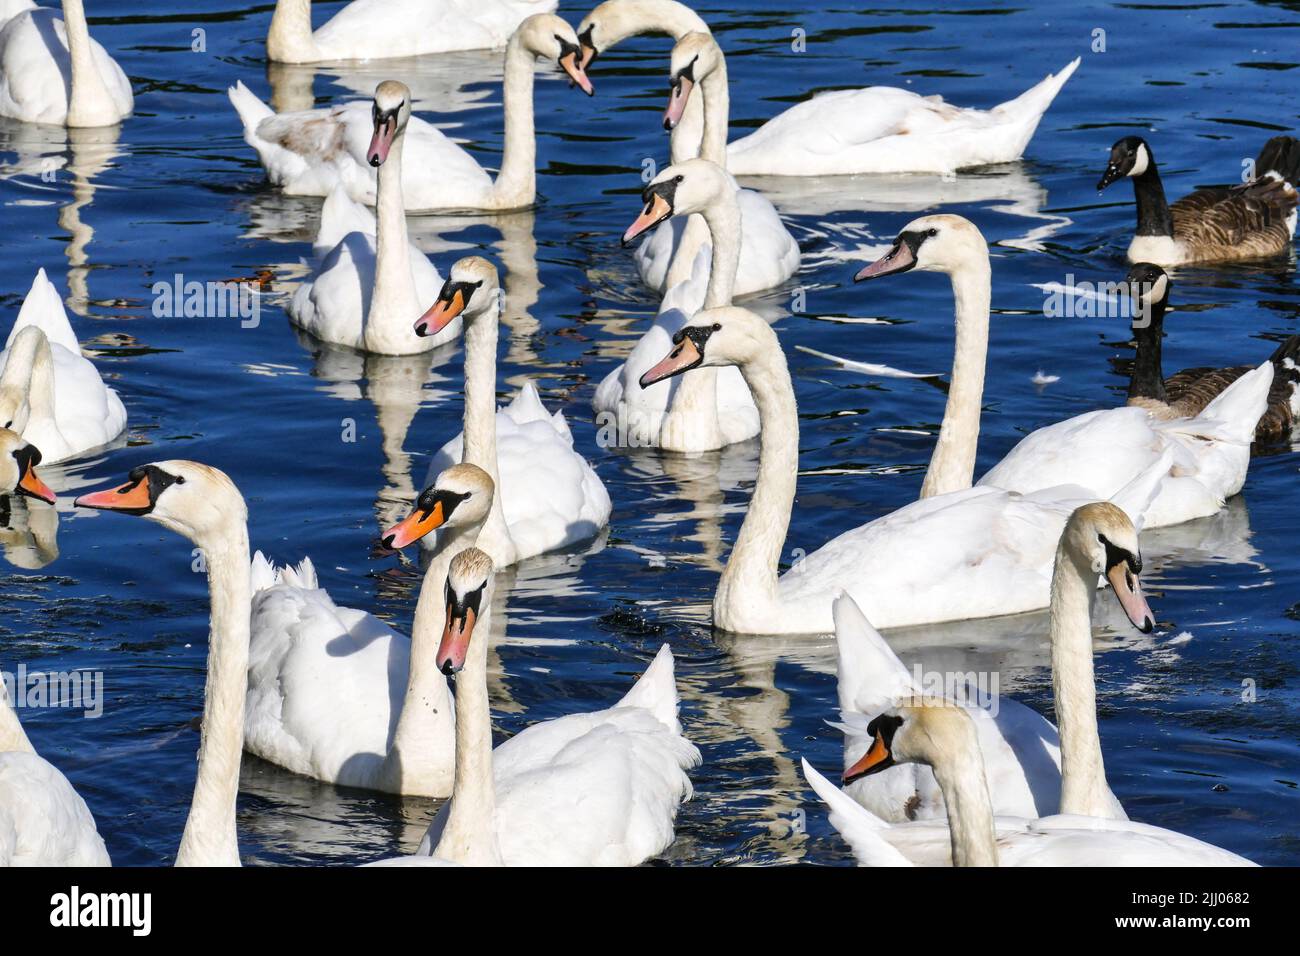 A group of swans on Snaresbrook Pond, Wanstead, London E11 Stock Photo